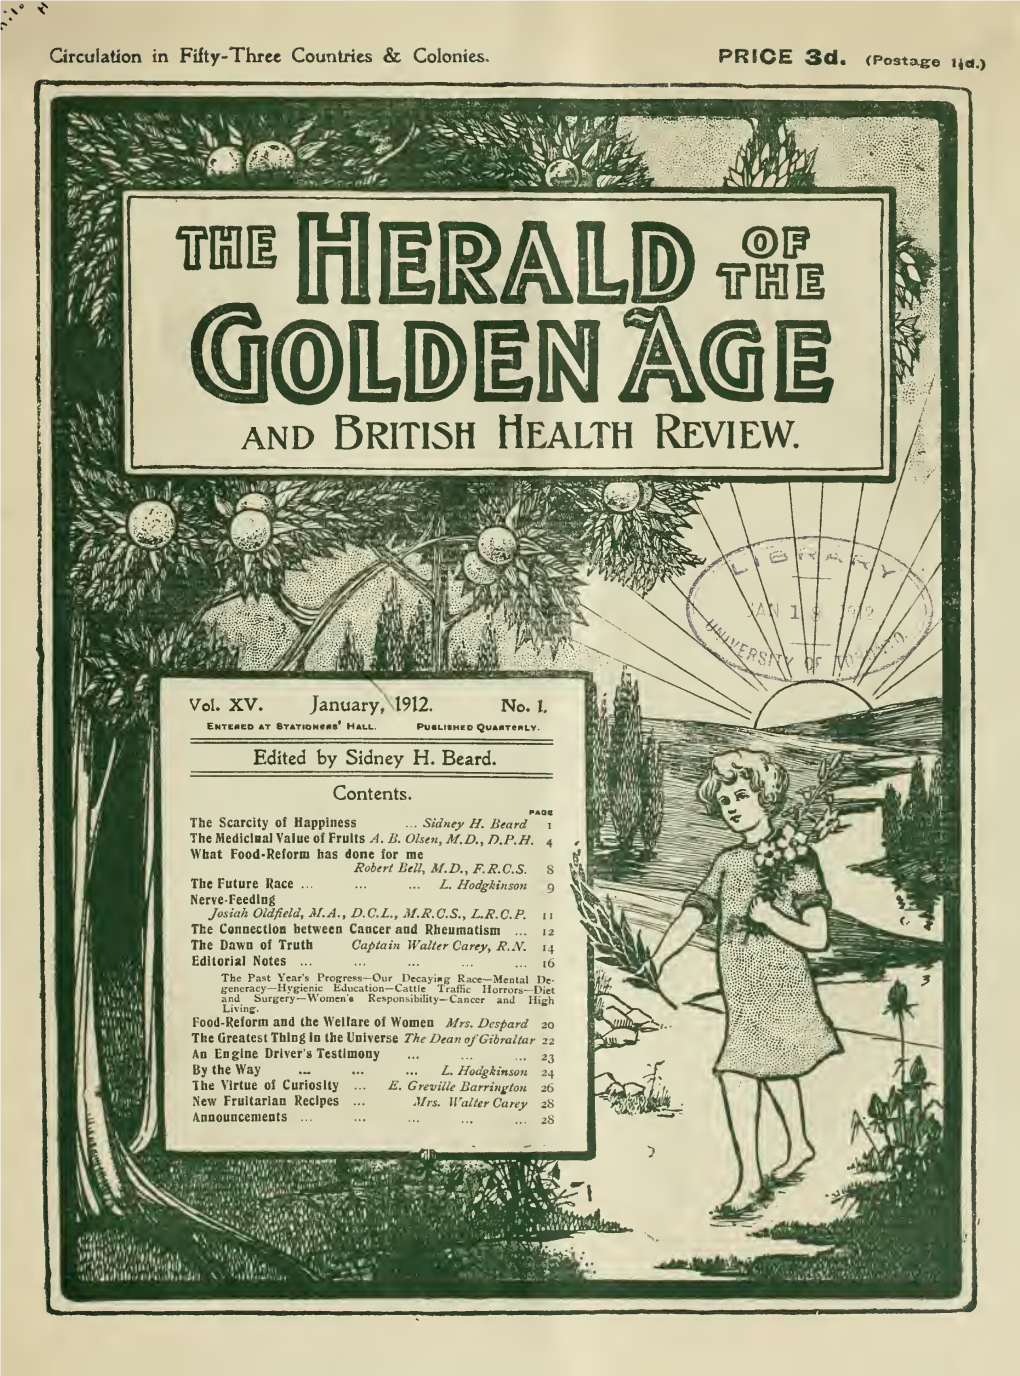 Herald of the Golden Age